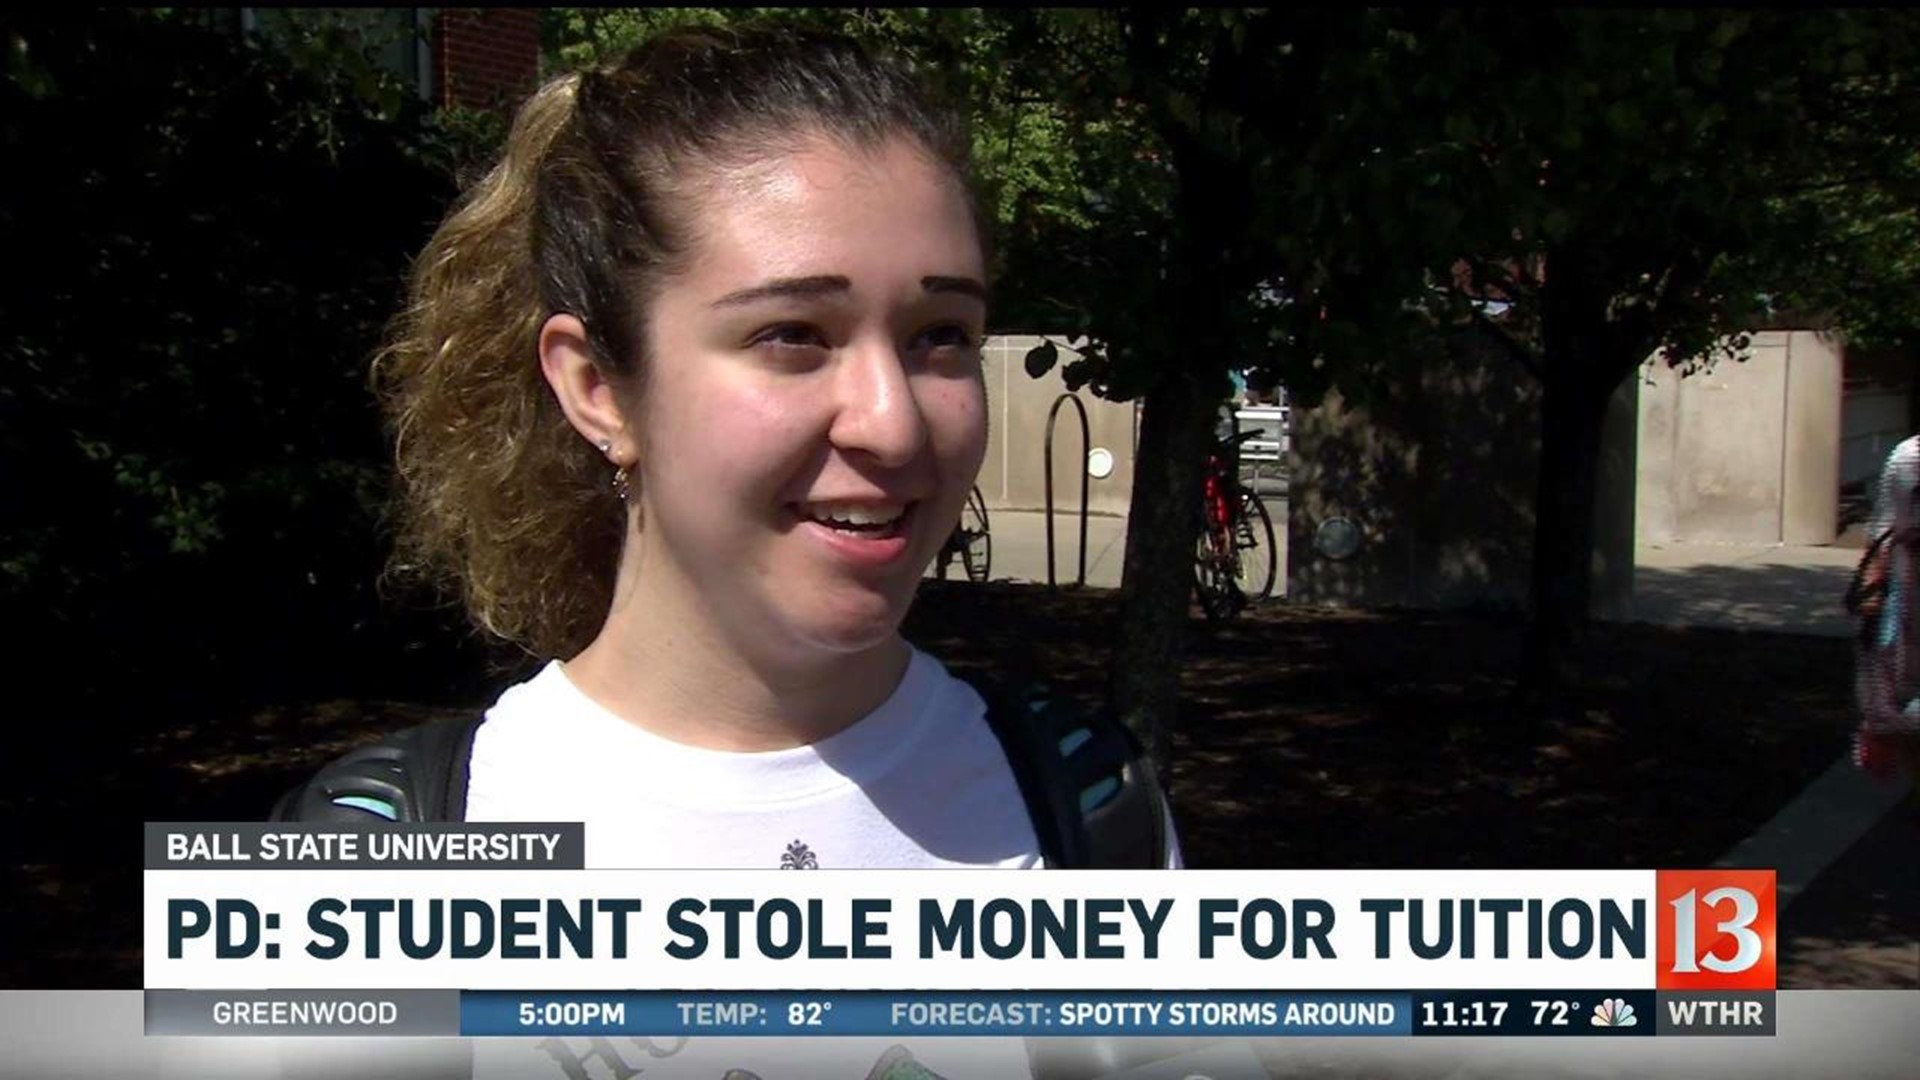 Police Ball State student used stolen money to pay tuition bill